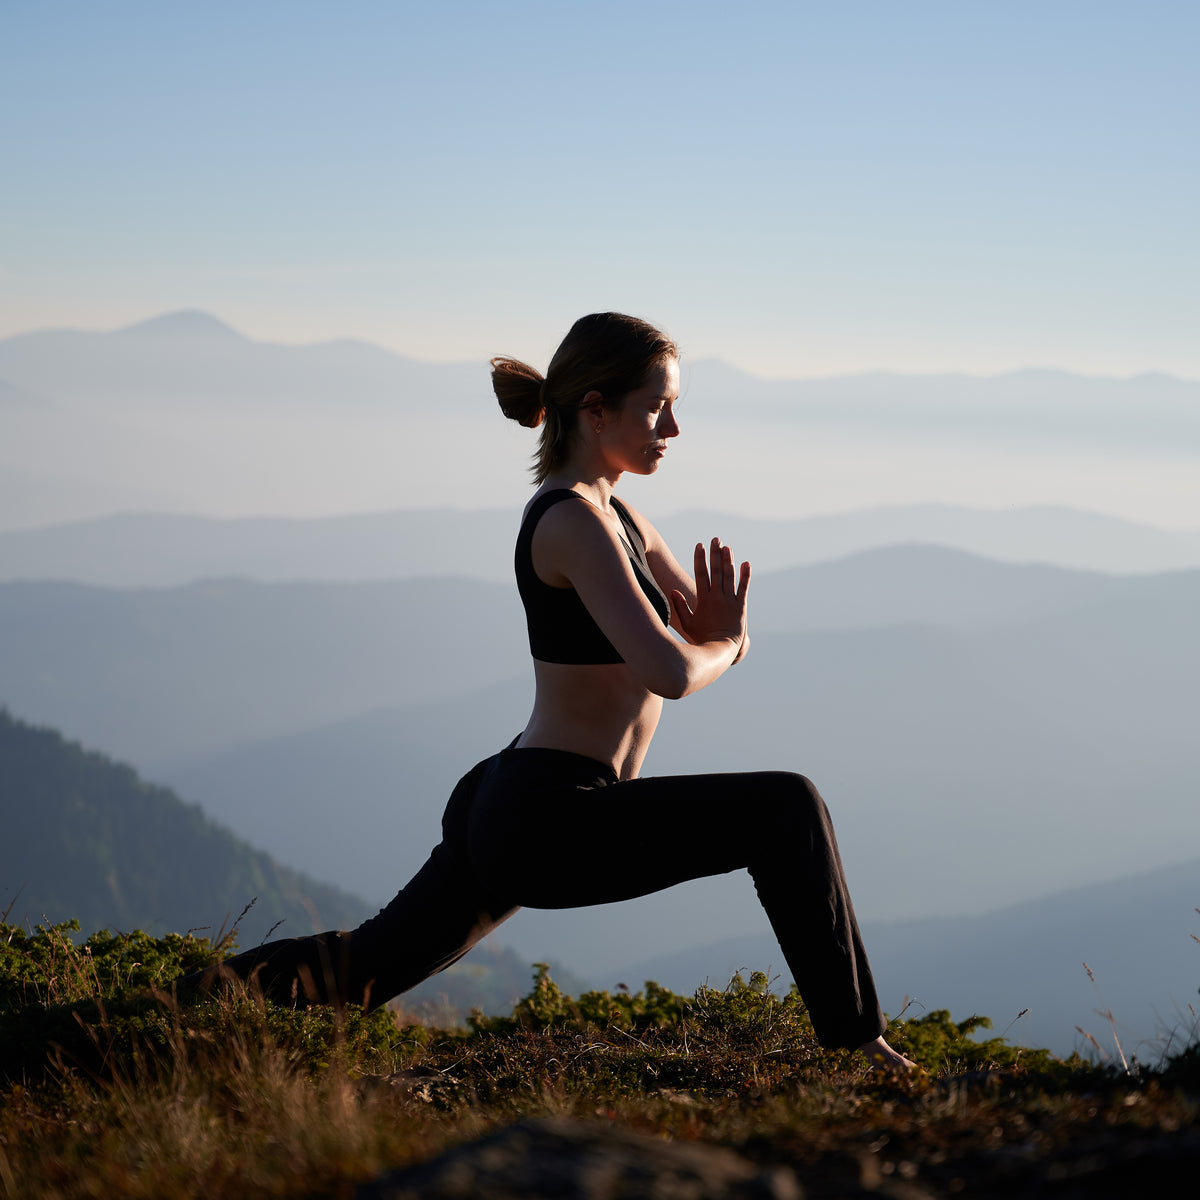 sporty-young-woman-practicing-yoga-mountains.jpg__PID:f19767d0-2a0b-408d-87e0-aa8461bb3f94